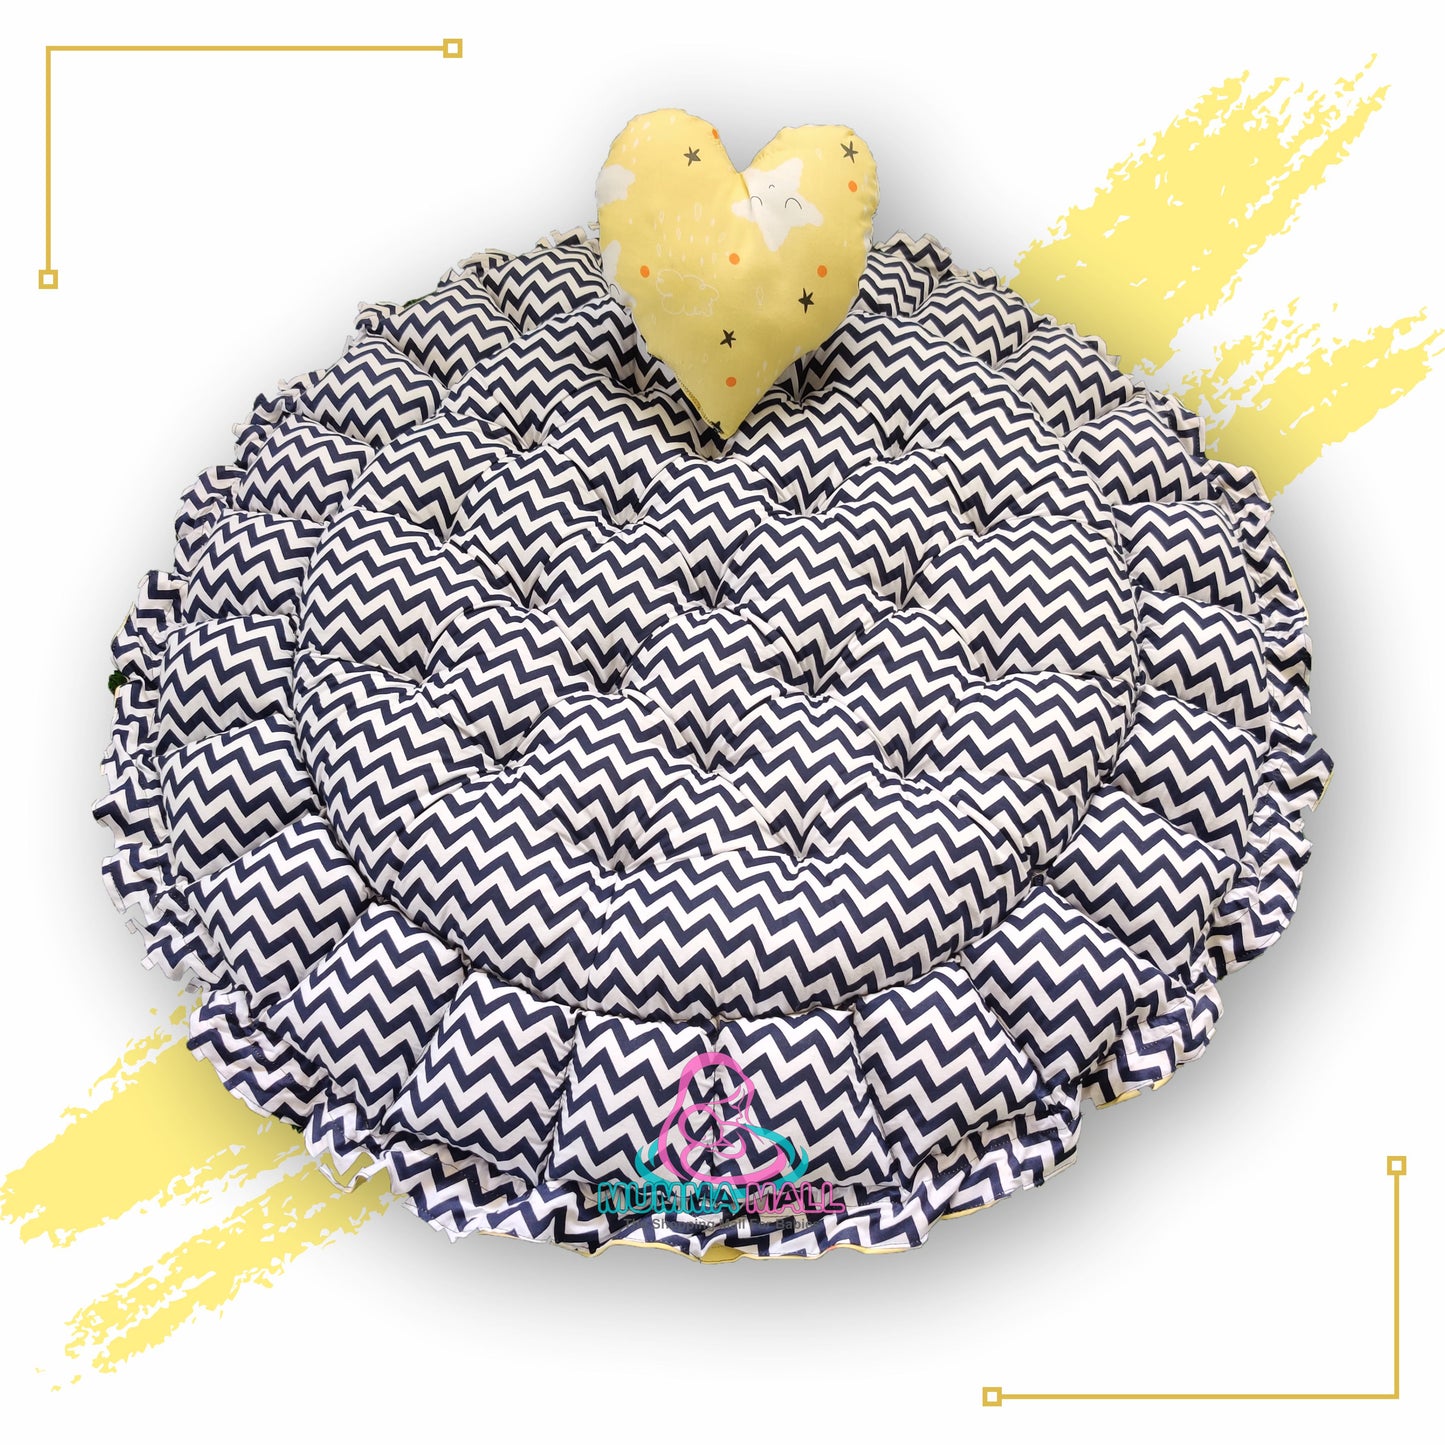 Round baby tub bed with a heart pillow (Yellow and Black)